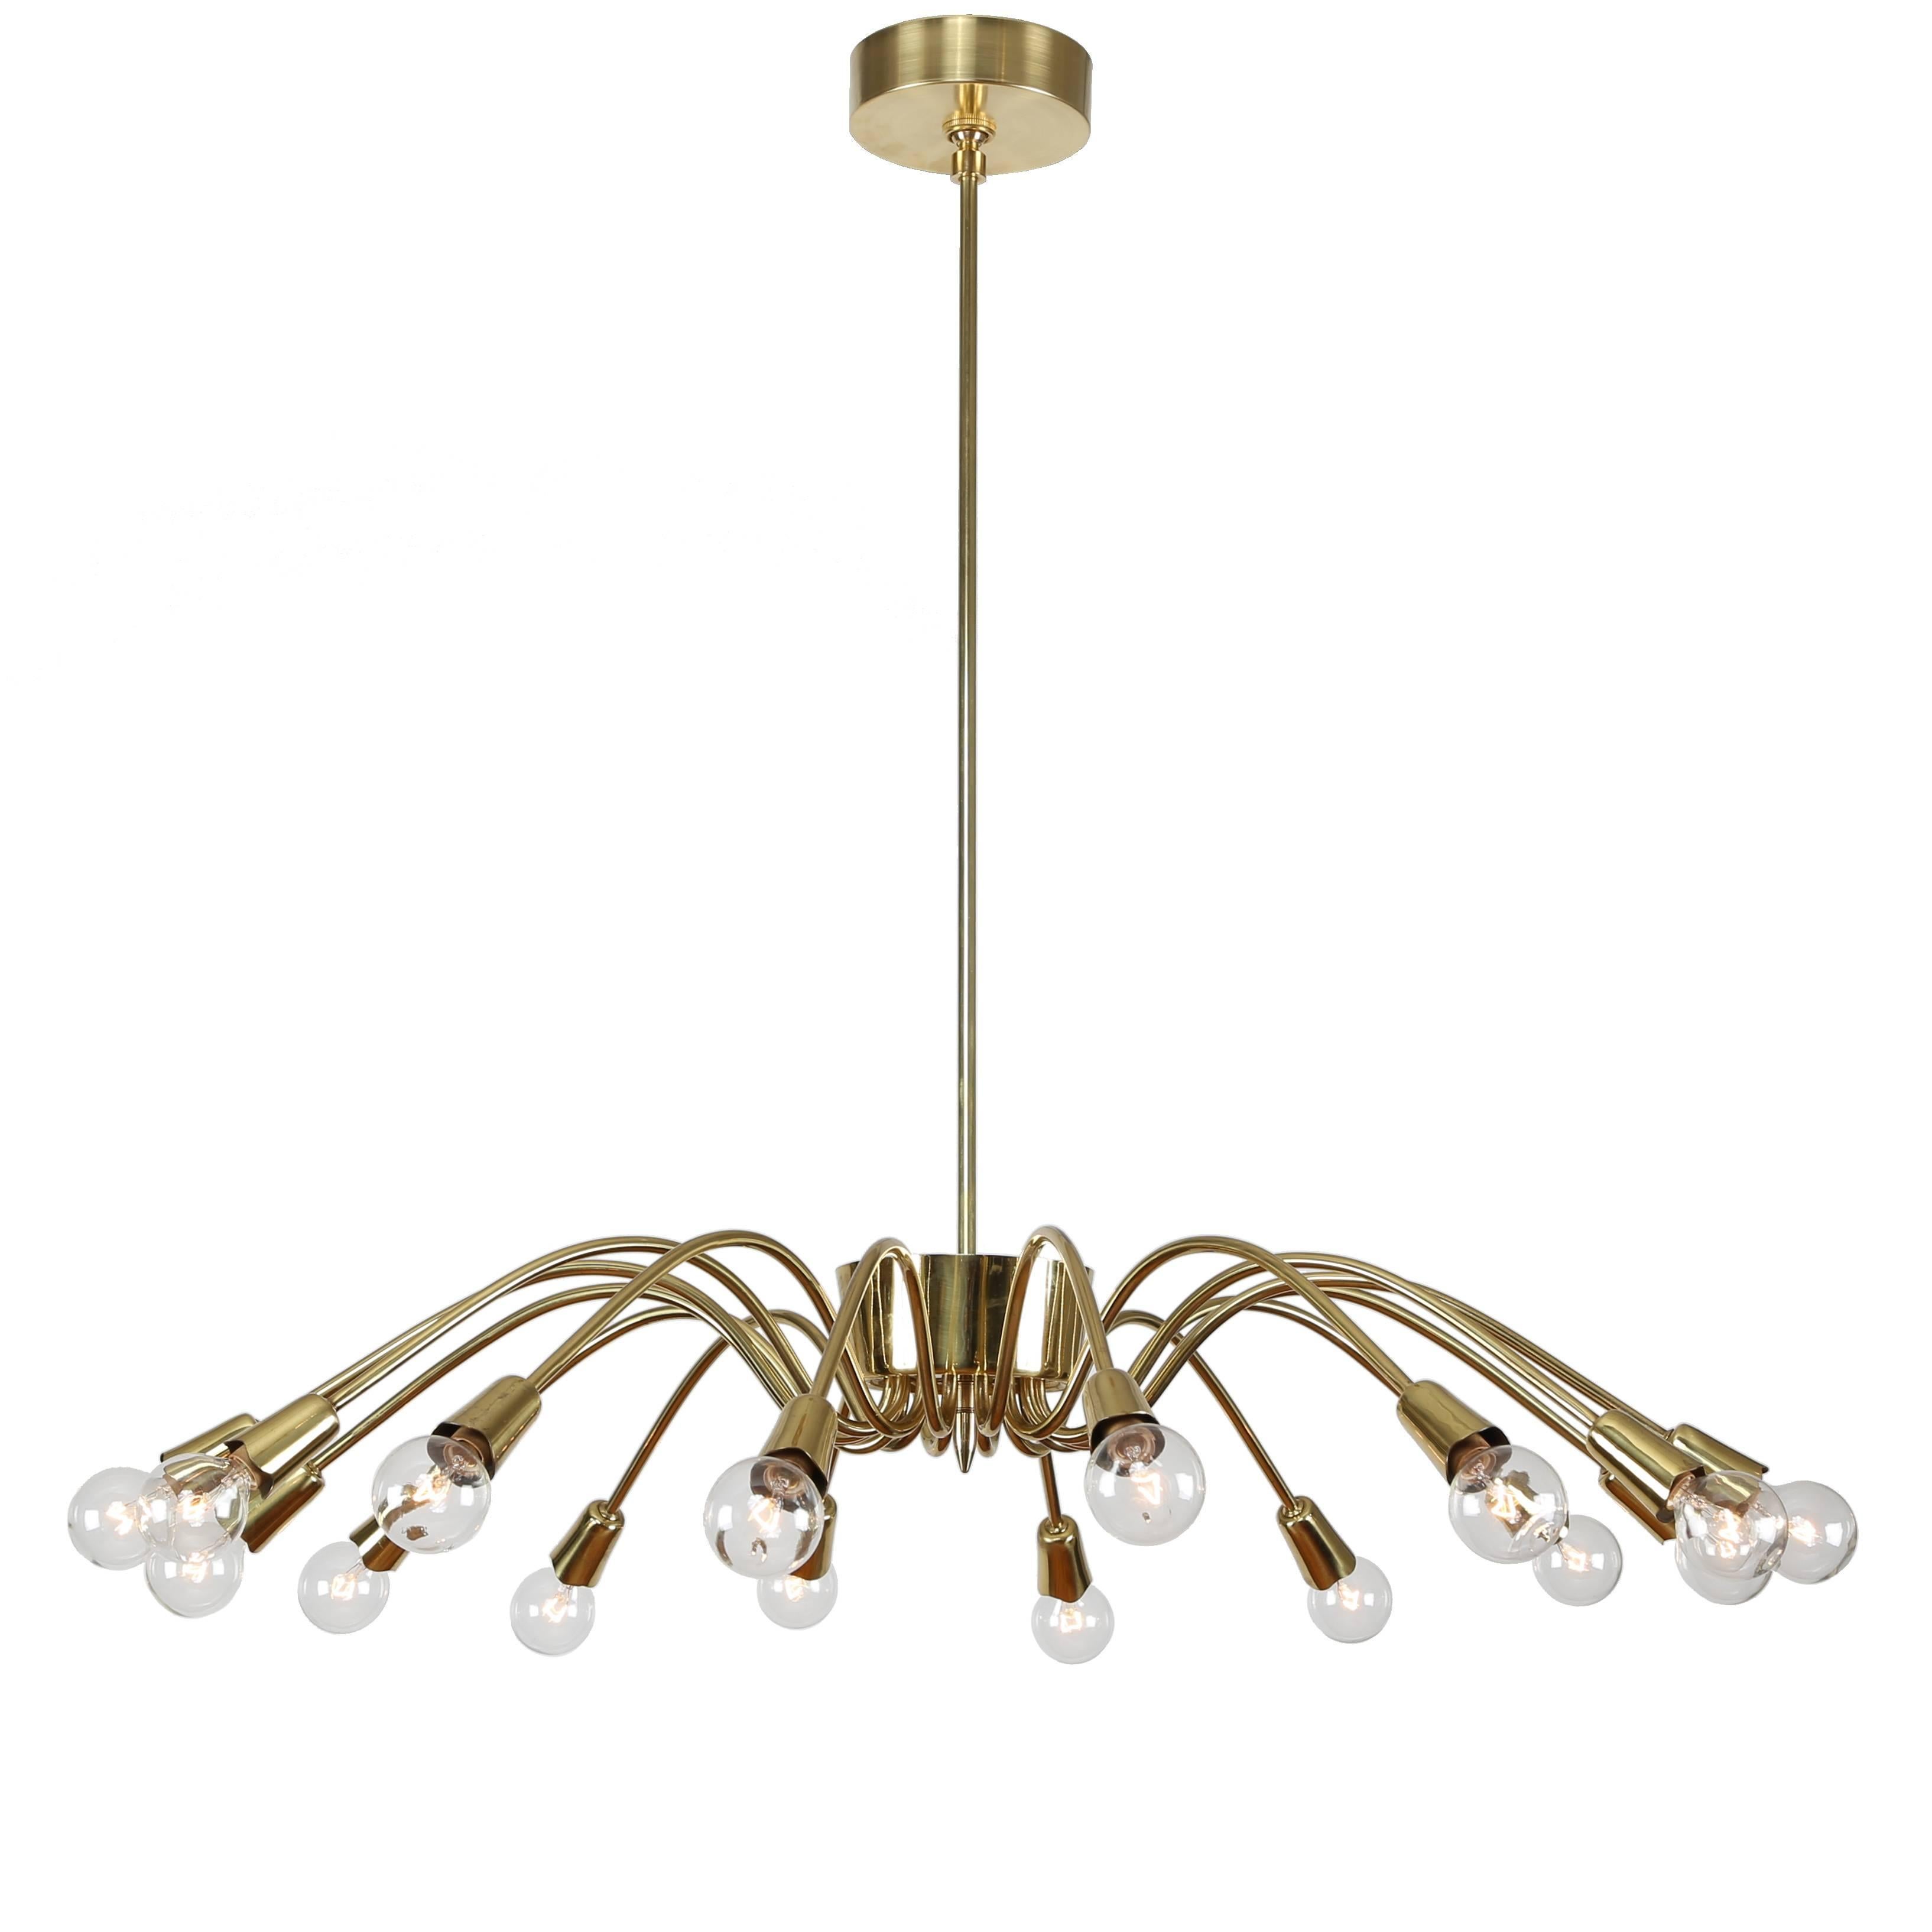 Striking 16-arm Italian brass spider chandelier, circa 1950s. Rewired. Brass polished and waxed, so the brass will age gradually. Without bulbs 32" in diameter x 30" height. 

See this item in our Brooklyn showroom, 61 Greenpoint Ave.,